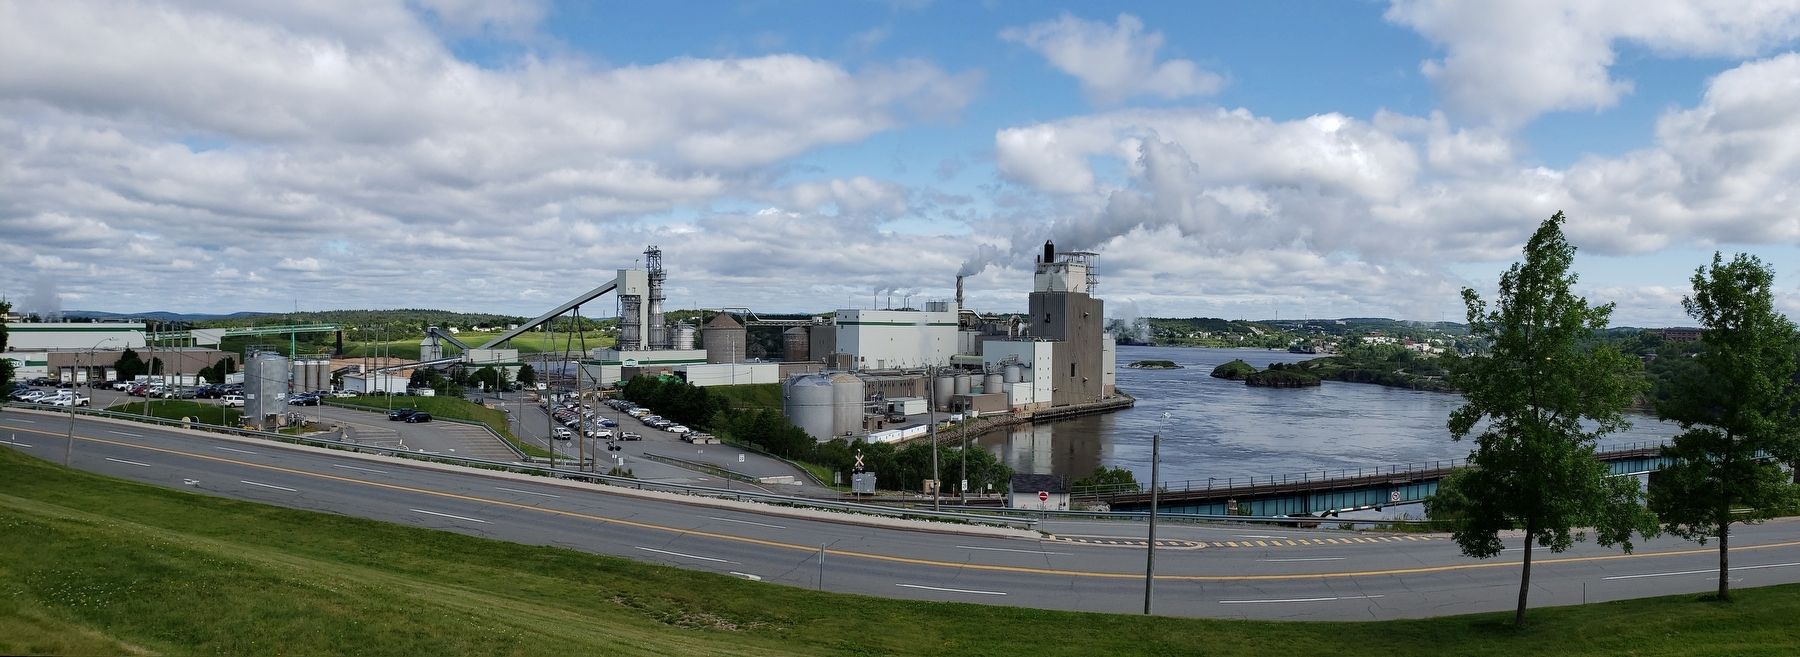 Irving Pulp & Paper Mill, Saint John River (<i>panoramic view from Wolastoq Park, near marker</i>) image. Click for full size.